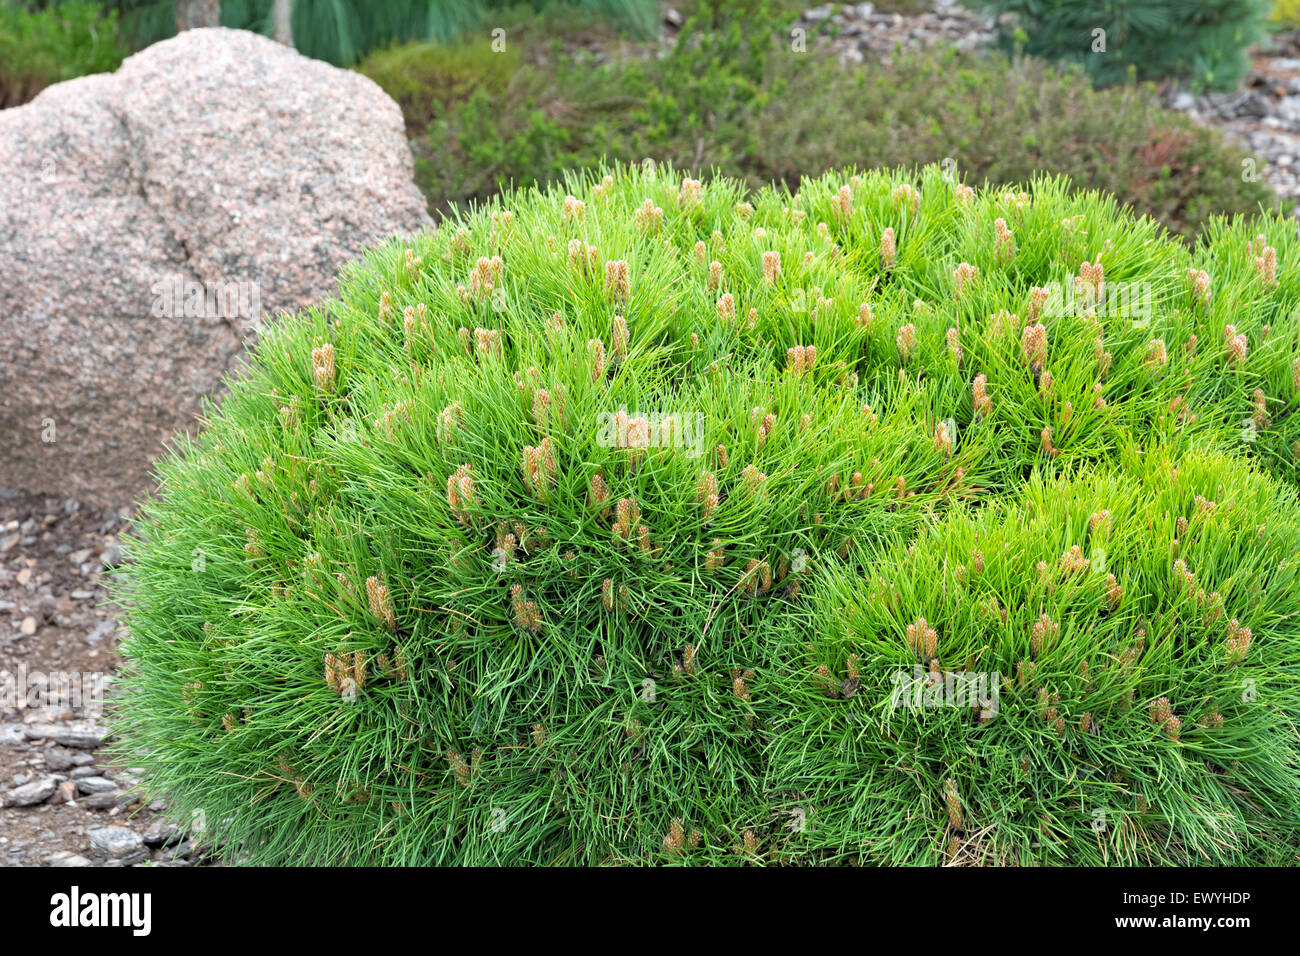 Dwarf Pine and stone in blurred background. Landscaping element. Stock Photo